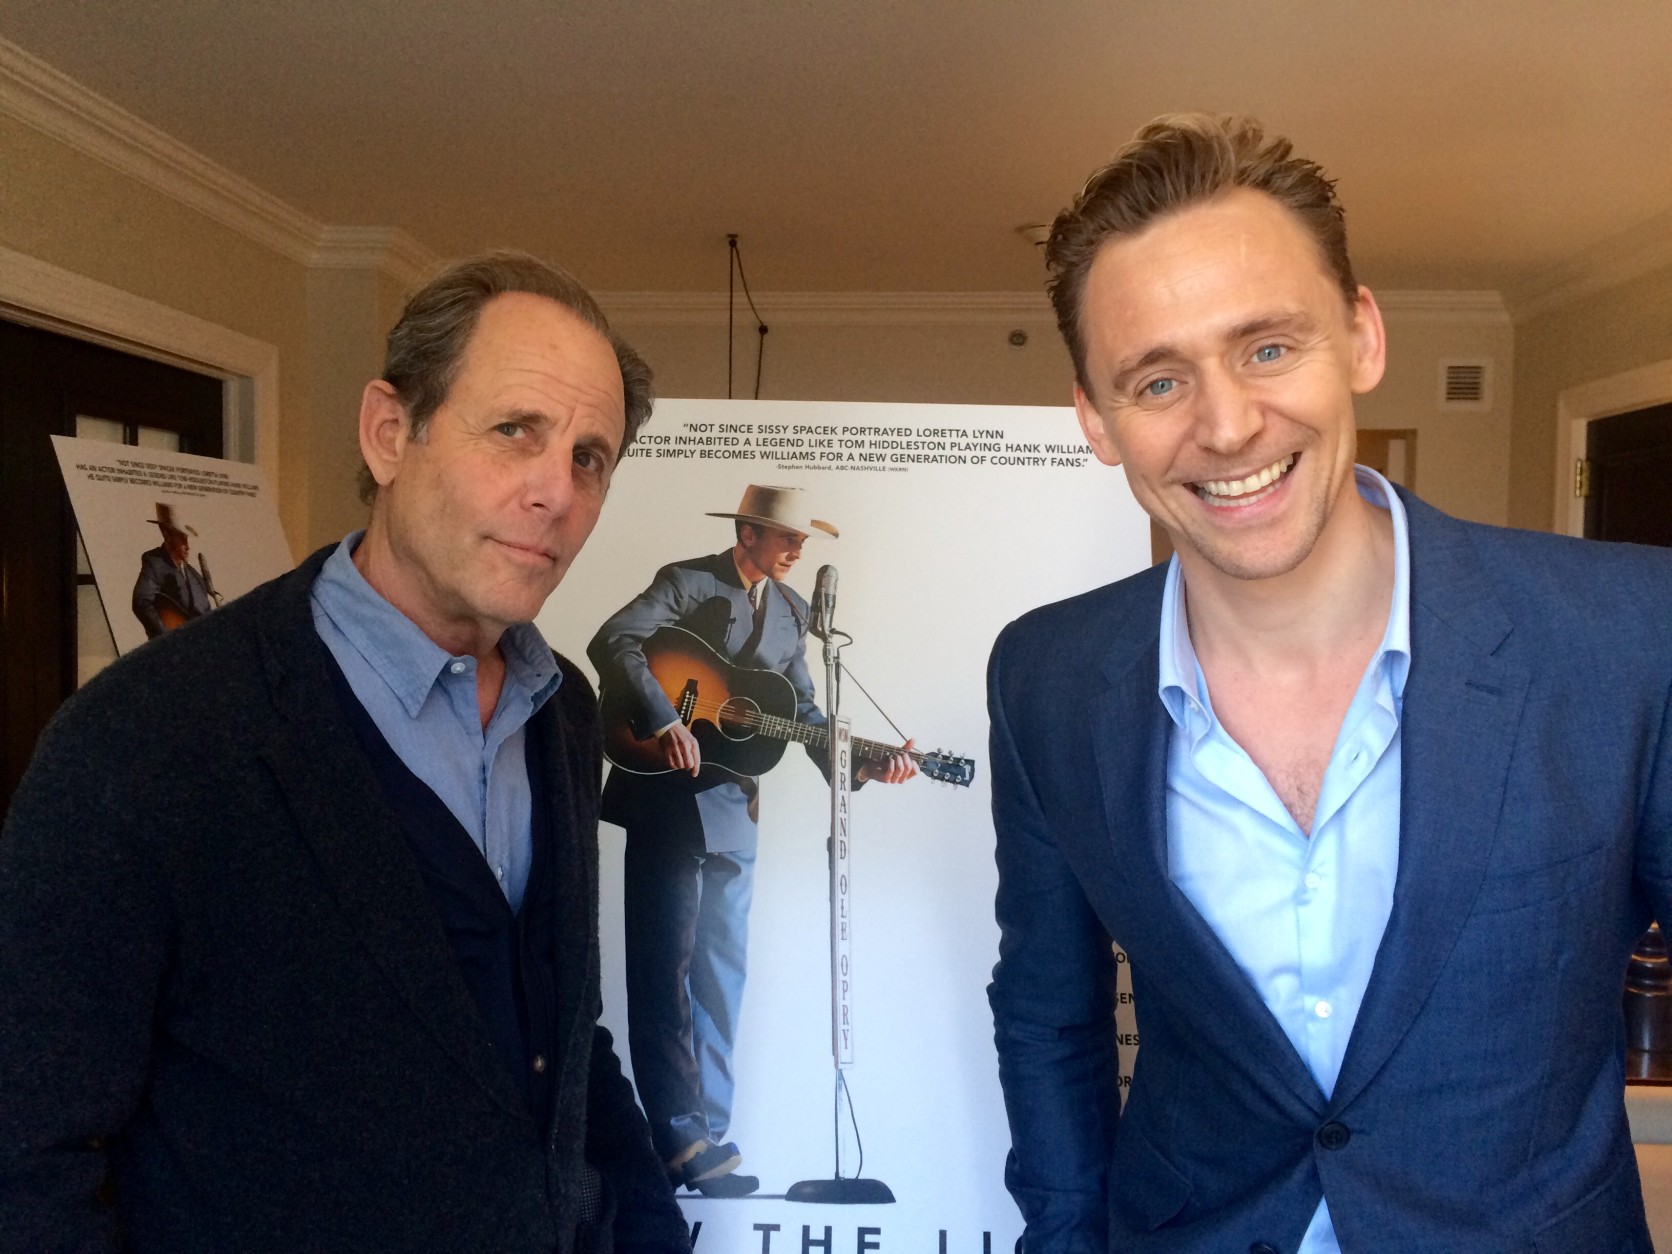 Director Marc Abraham (left) and actor Tom Hiddleston (right) visit Washington D.C. to promote the Hank Williams biopic "I Saw the Light." (WTOP/Jason Fraley)